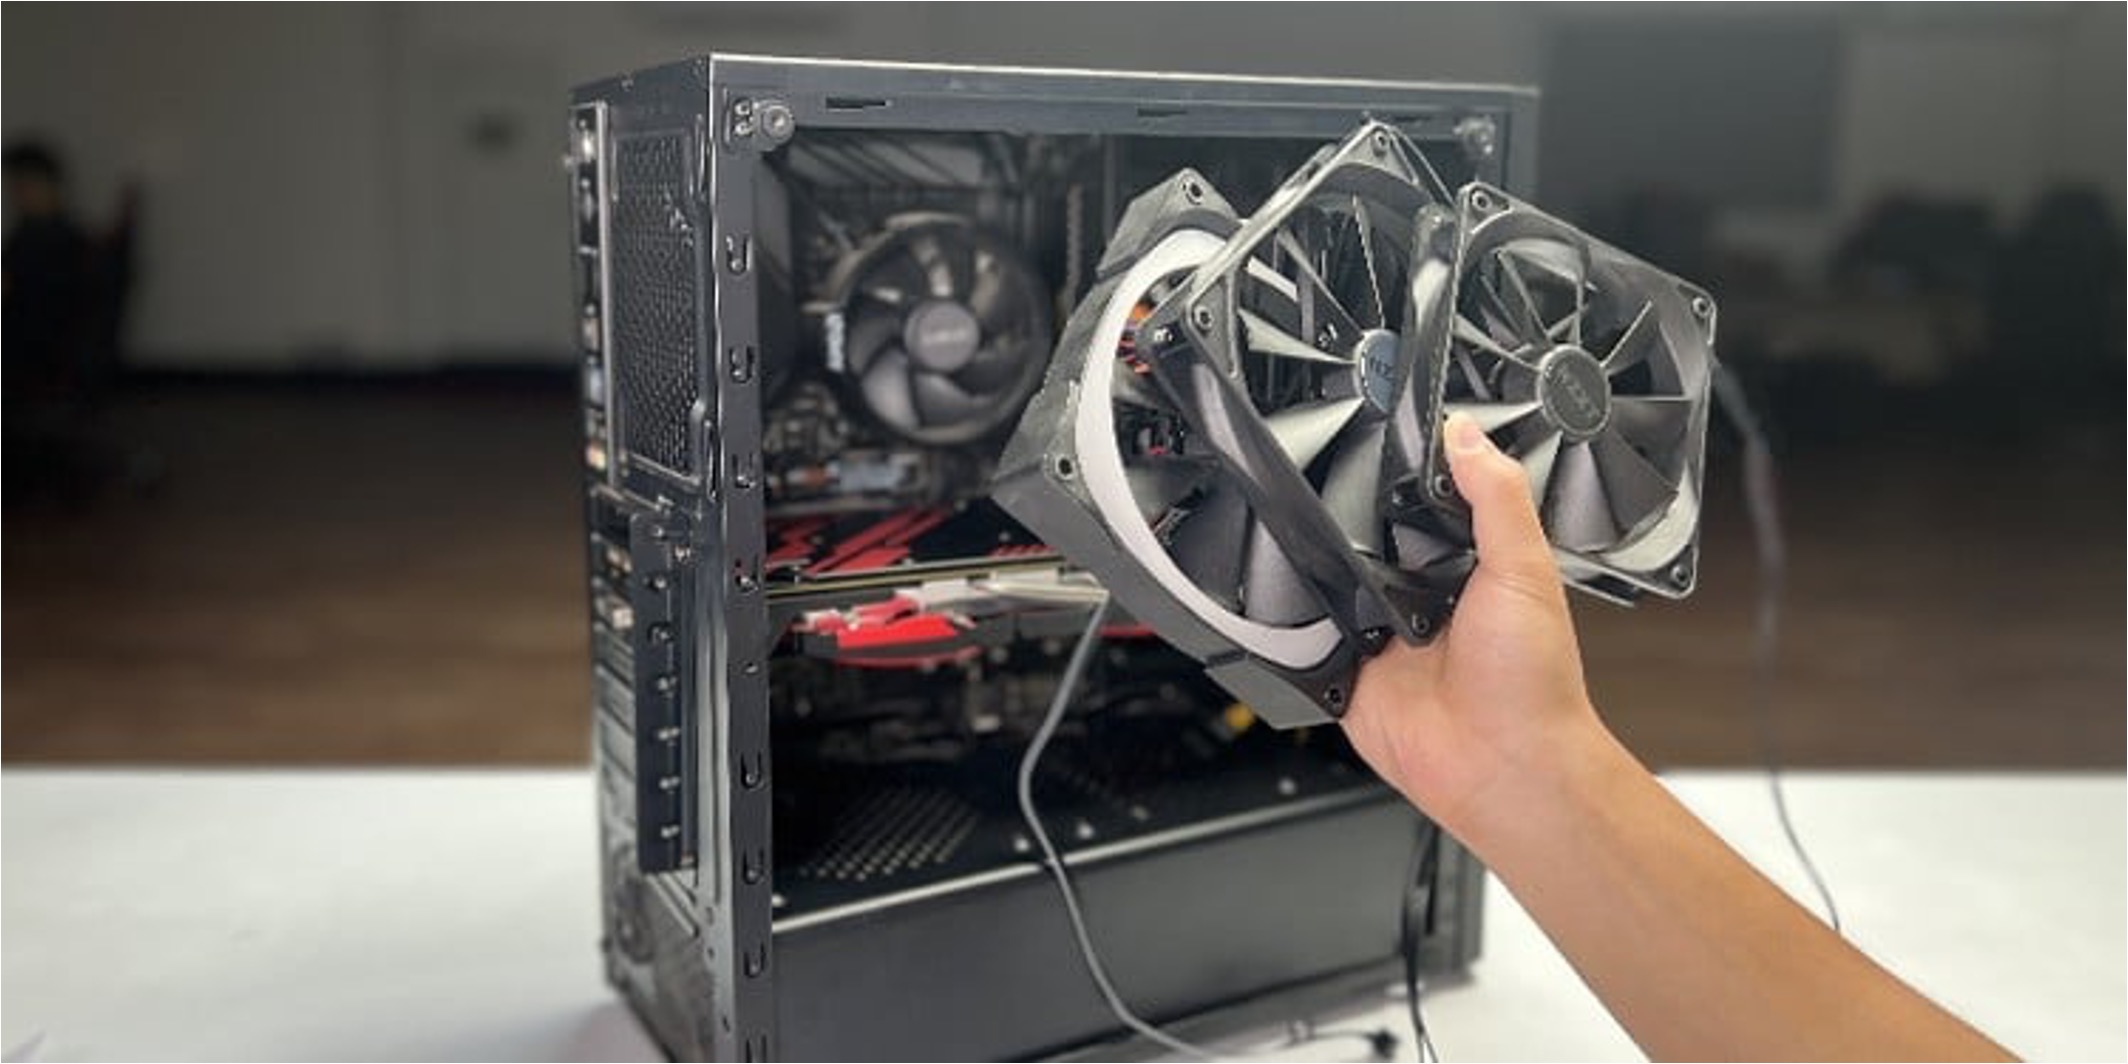 How Do I Know What My Case Fan Is?